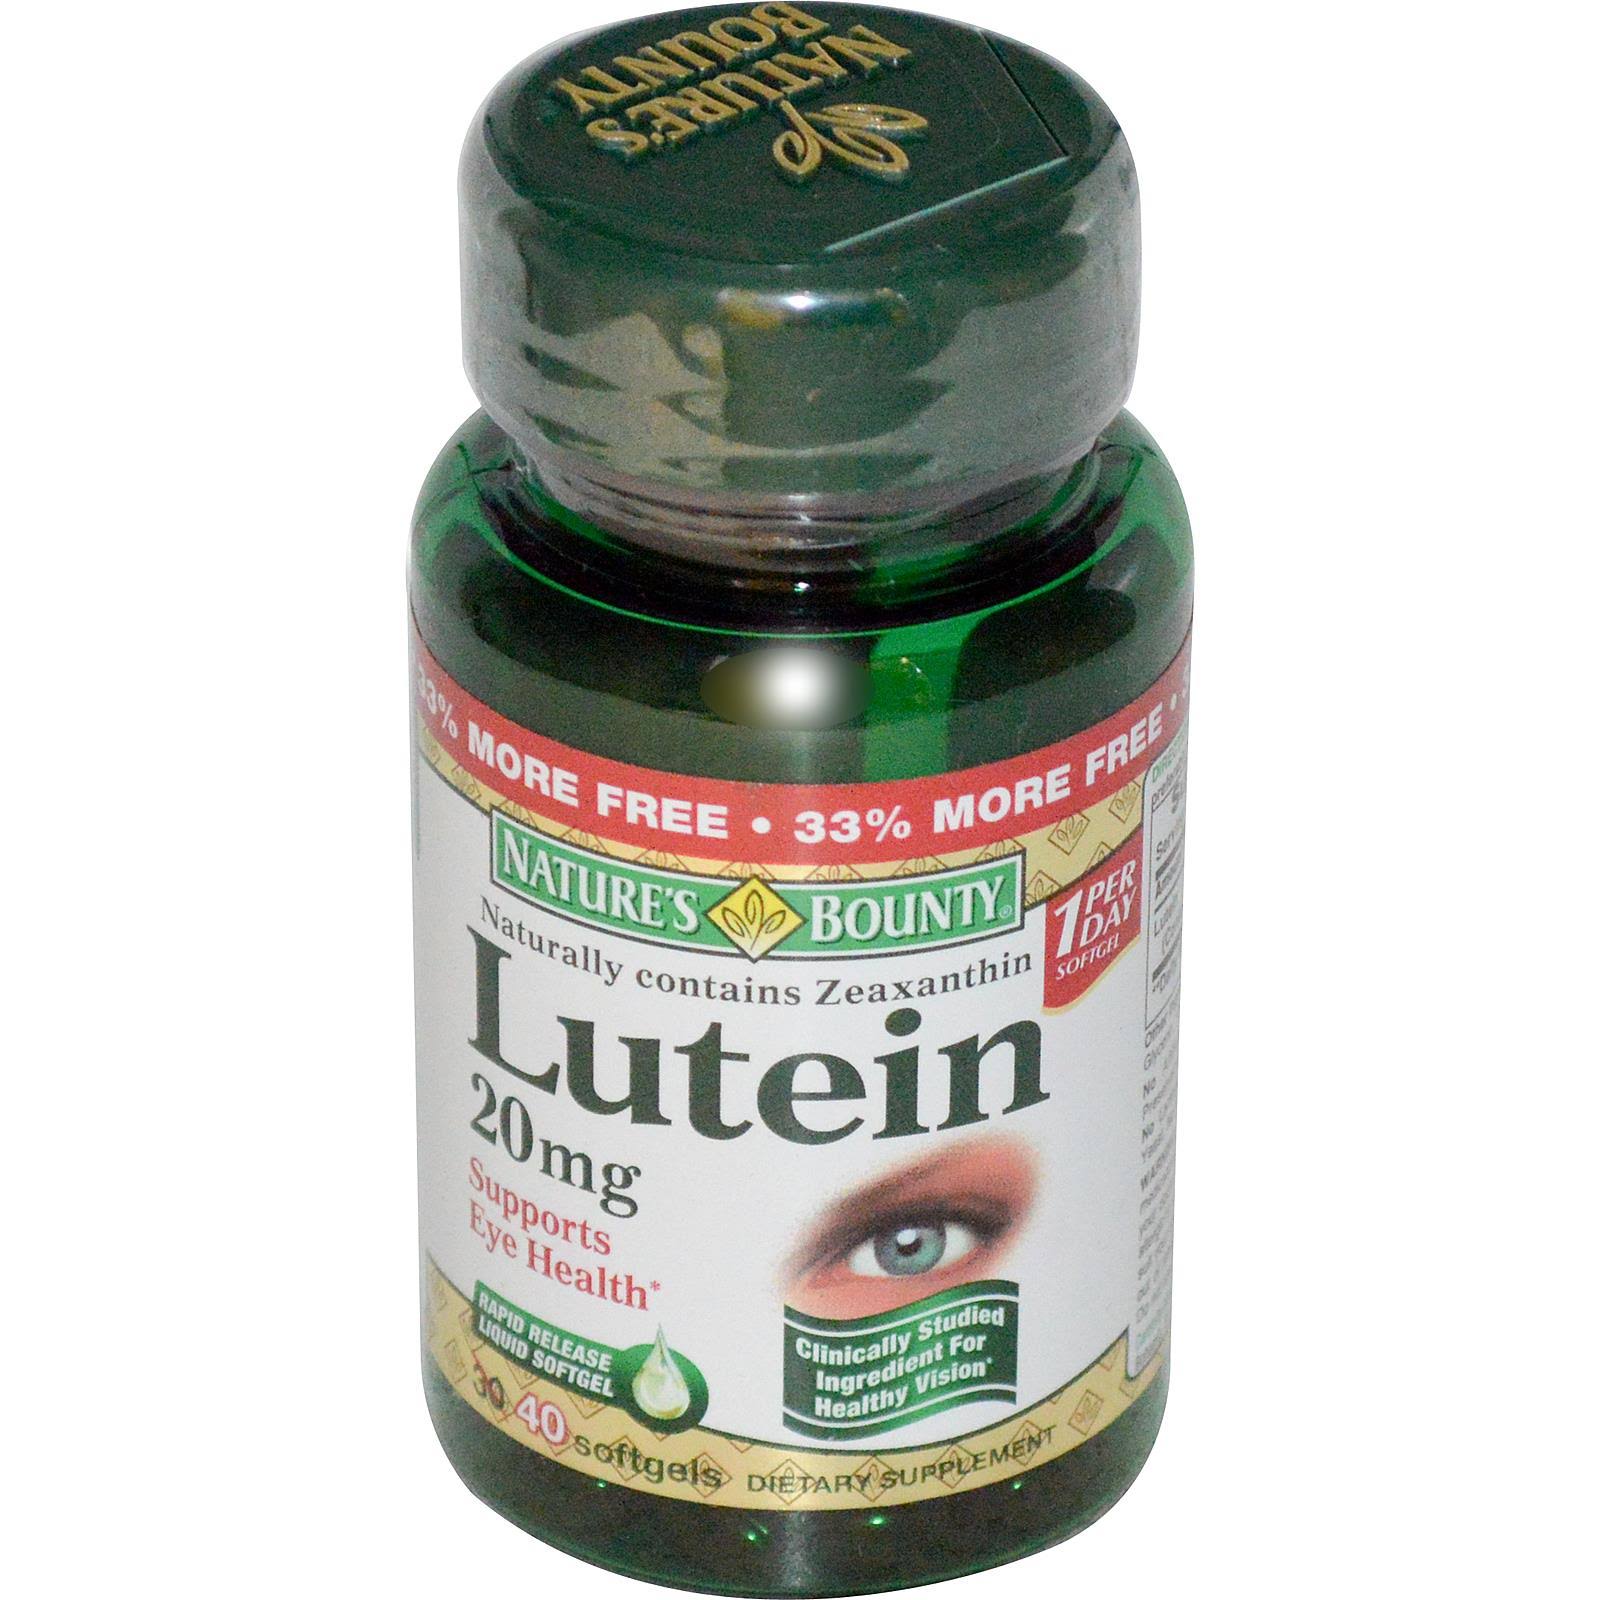 Nature's Bounty Lutein Supplement - 40 Softgels